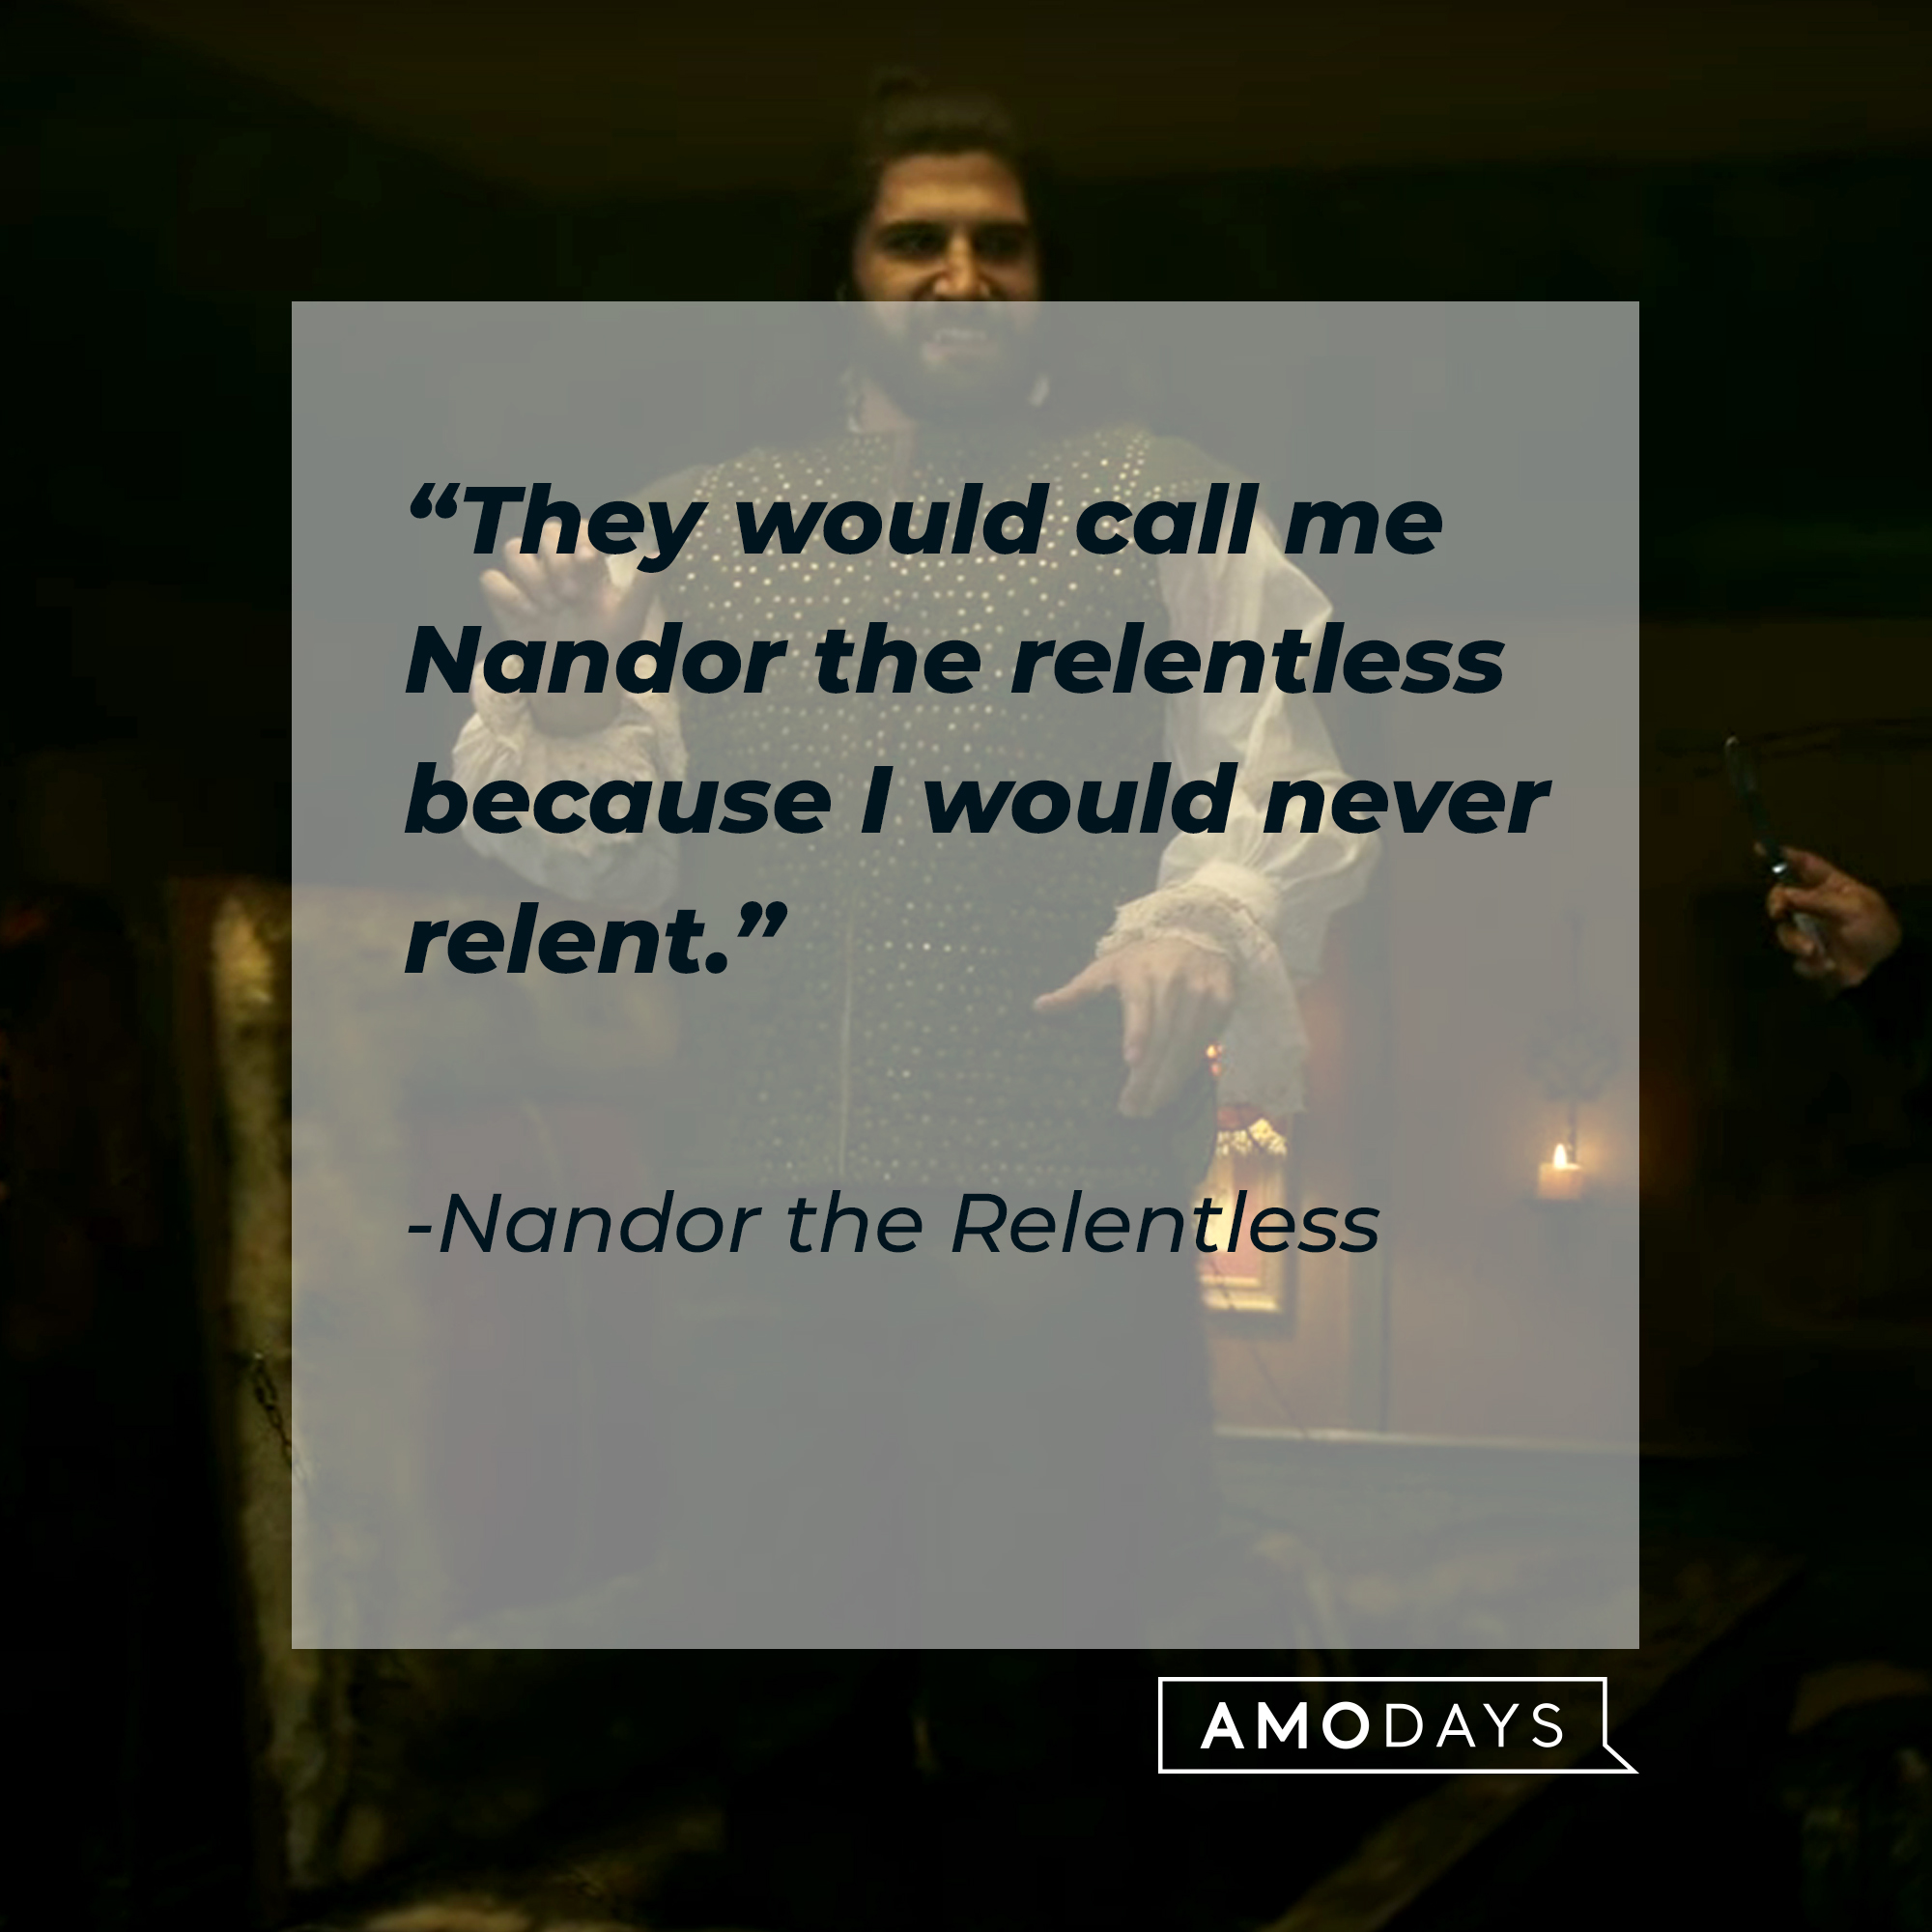 Nandor the Relentless, with his quote: “They would call me Nandor the Relentless because I would never relent.” | Source: Facebook.com/TheShadowsFX